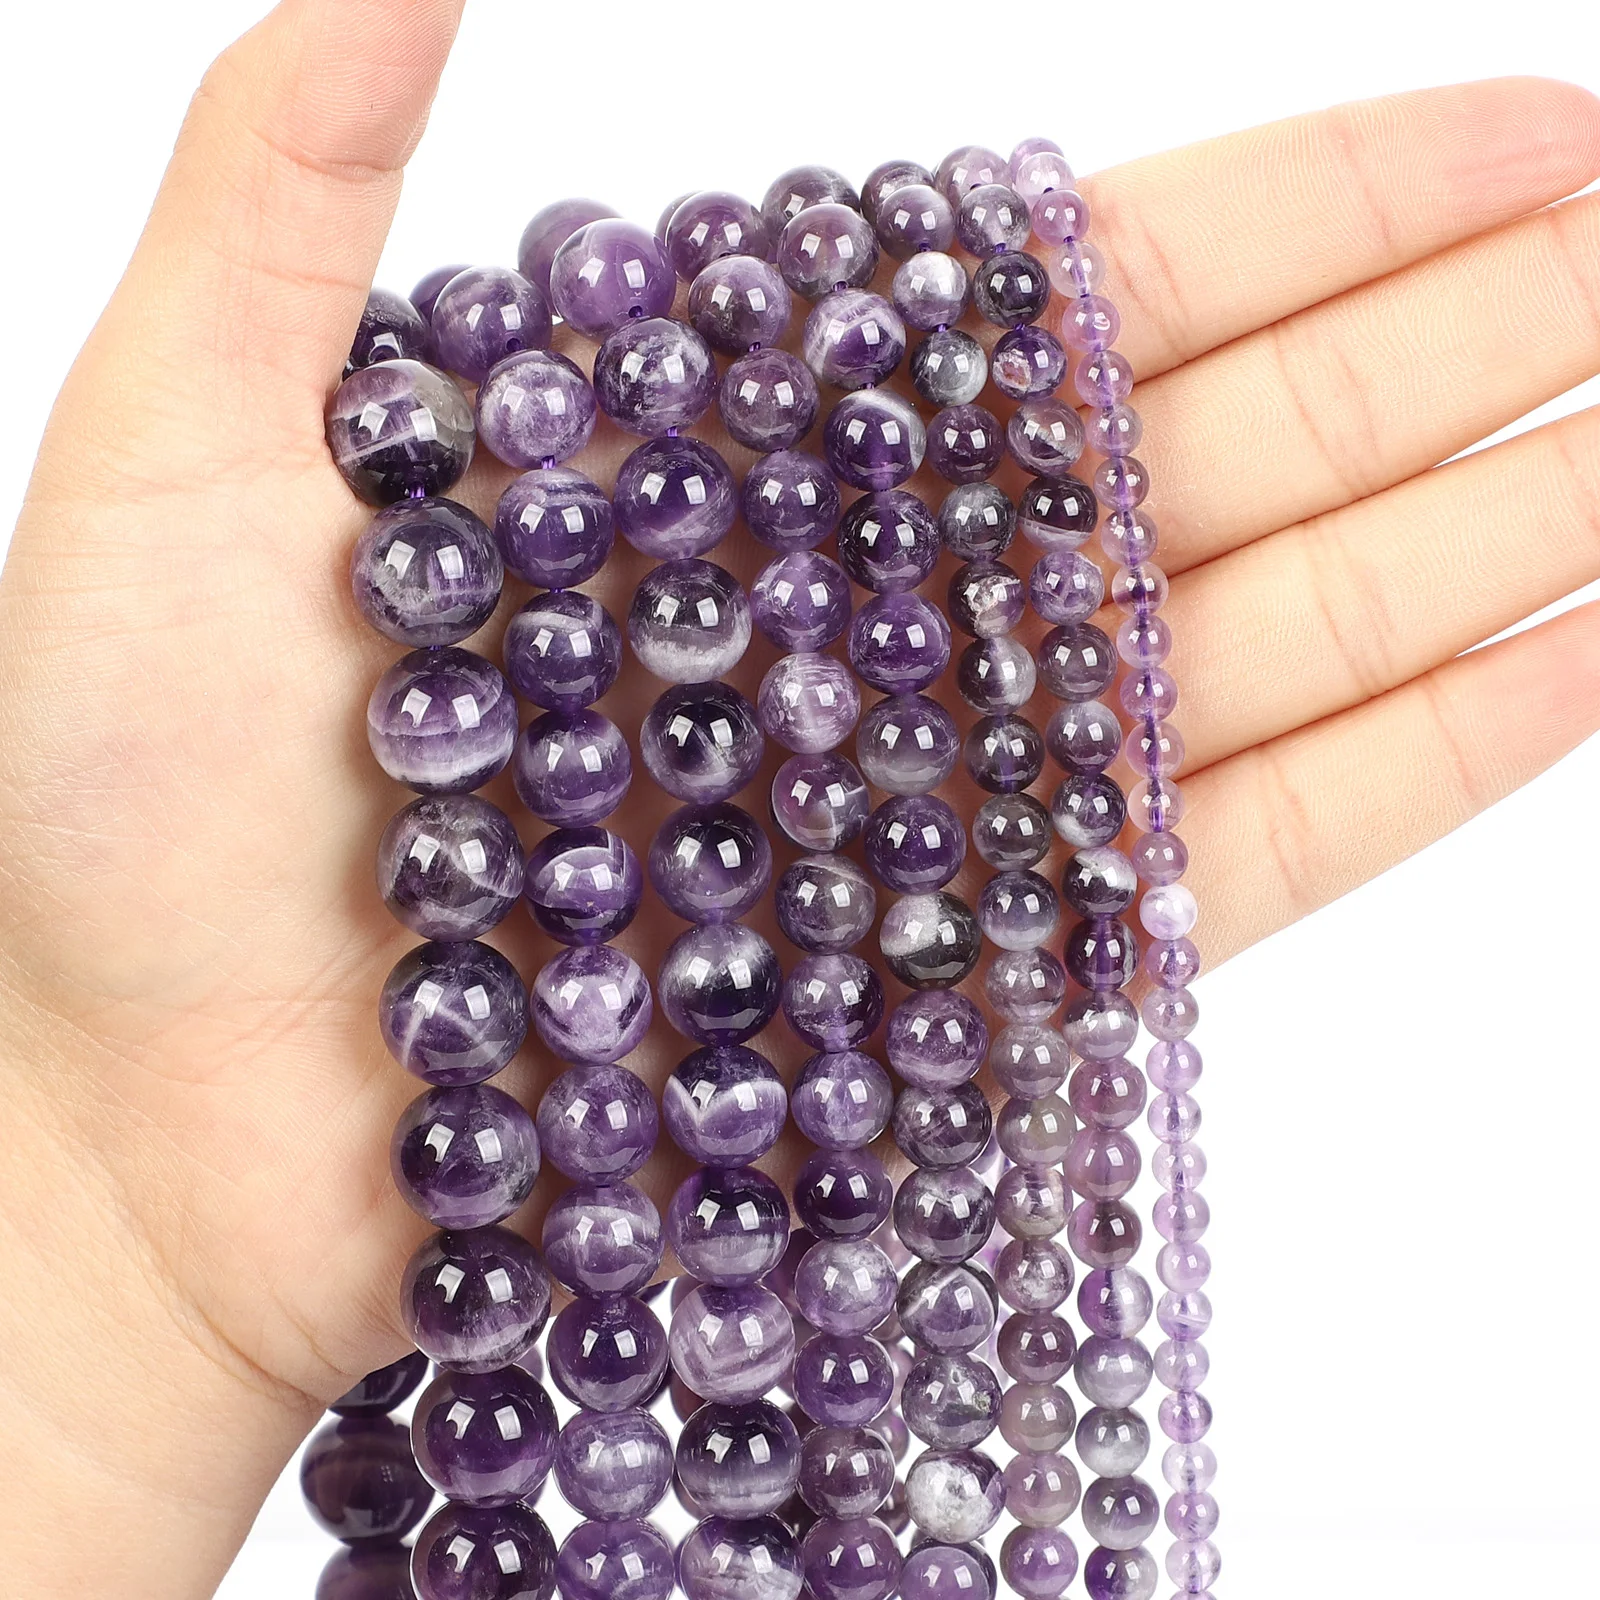 Natural Stone Beads Dream Amethyst Quartz Beads Loose Spacer Bead For Jewelry Making DIY Bracelet Necklace Accessories 4-12MM